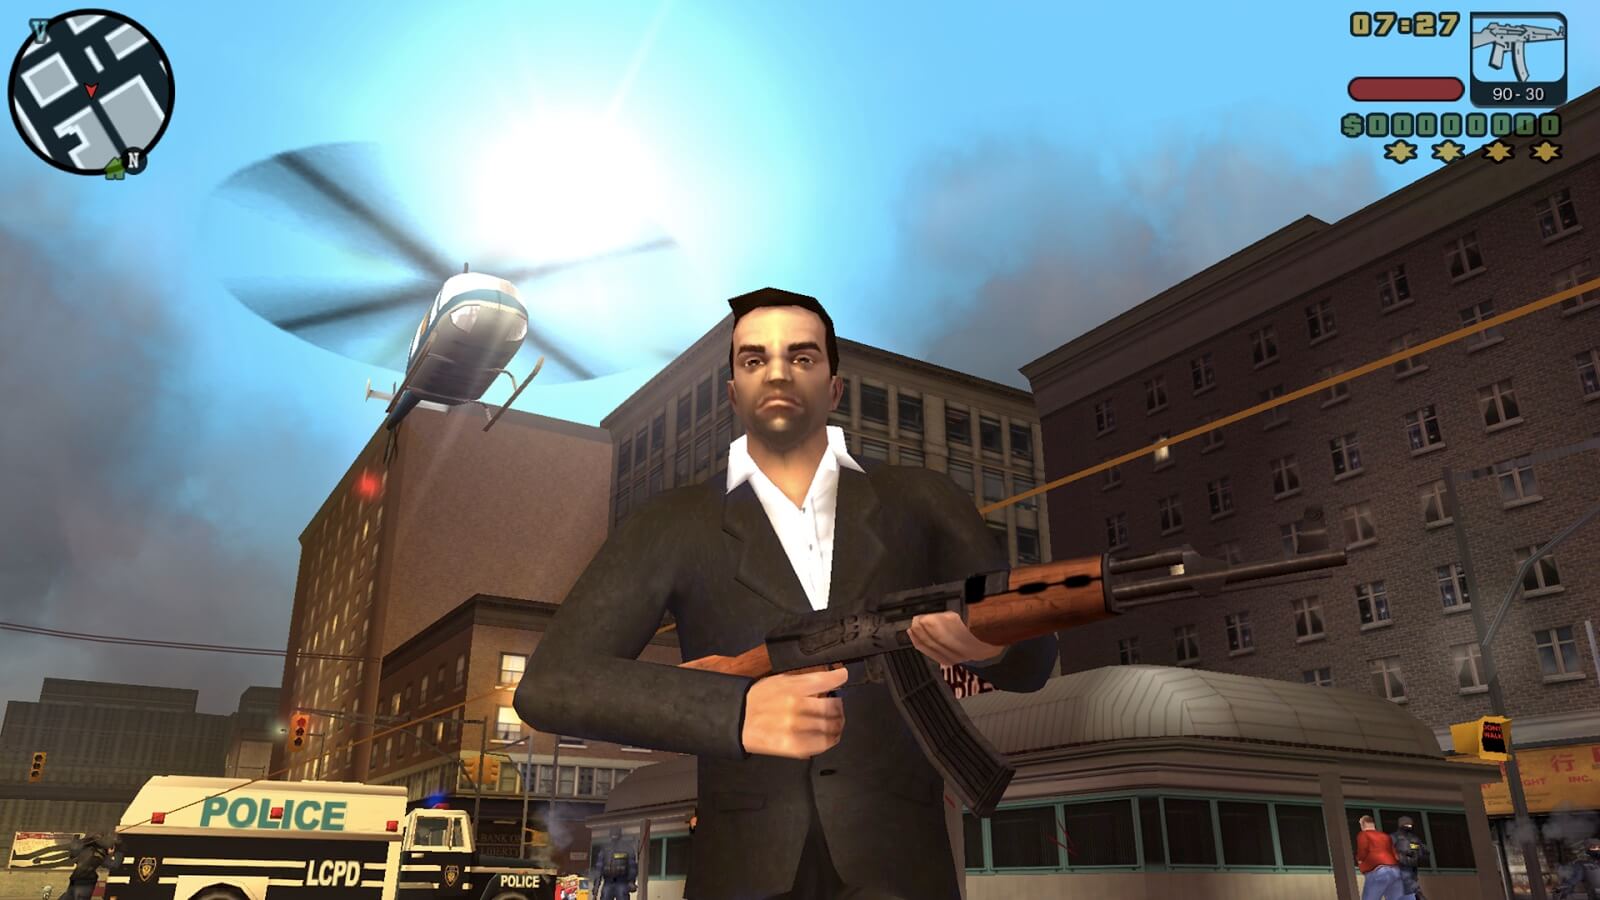 Gta liberty city stories pc free download acer emachines e725 vga driver download windows 7